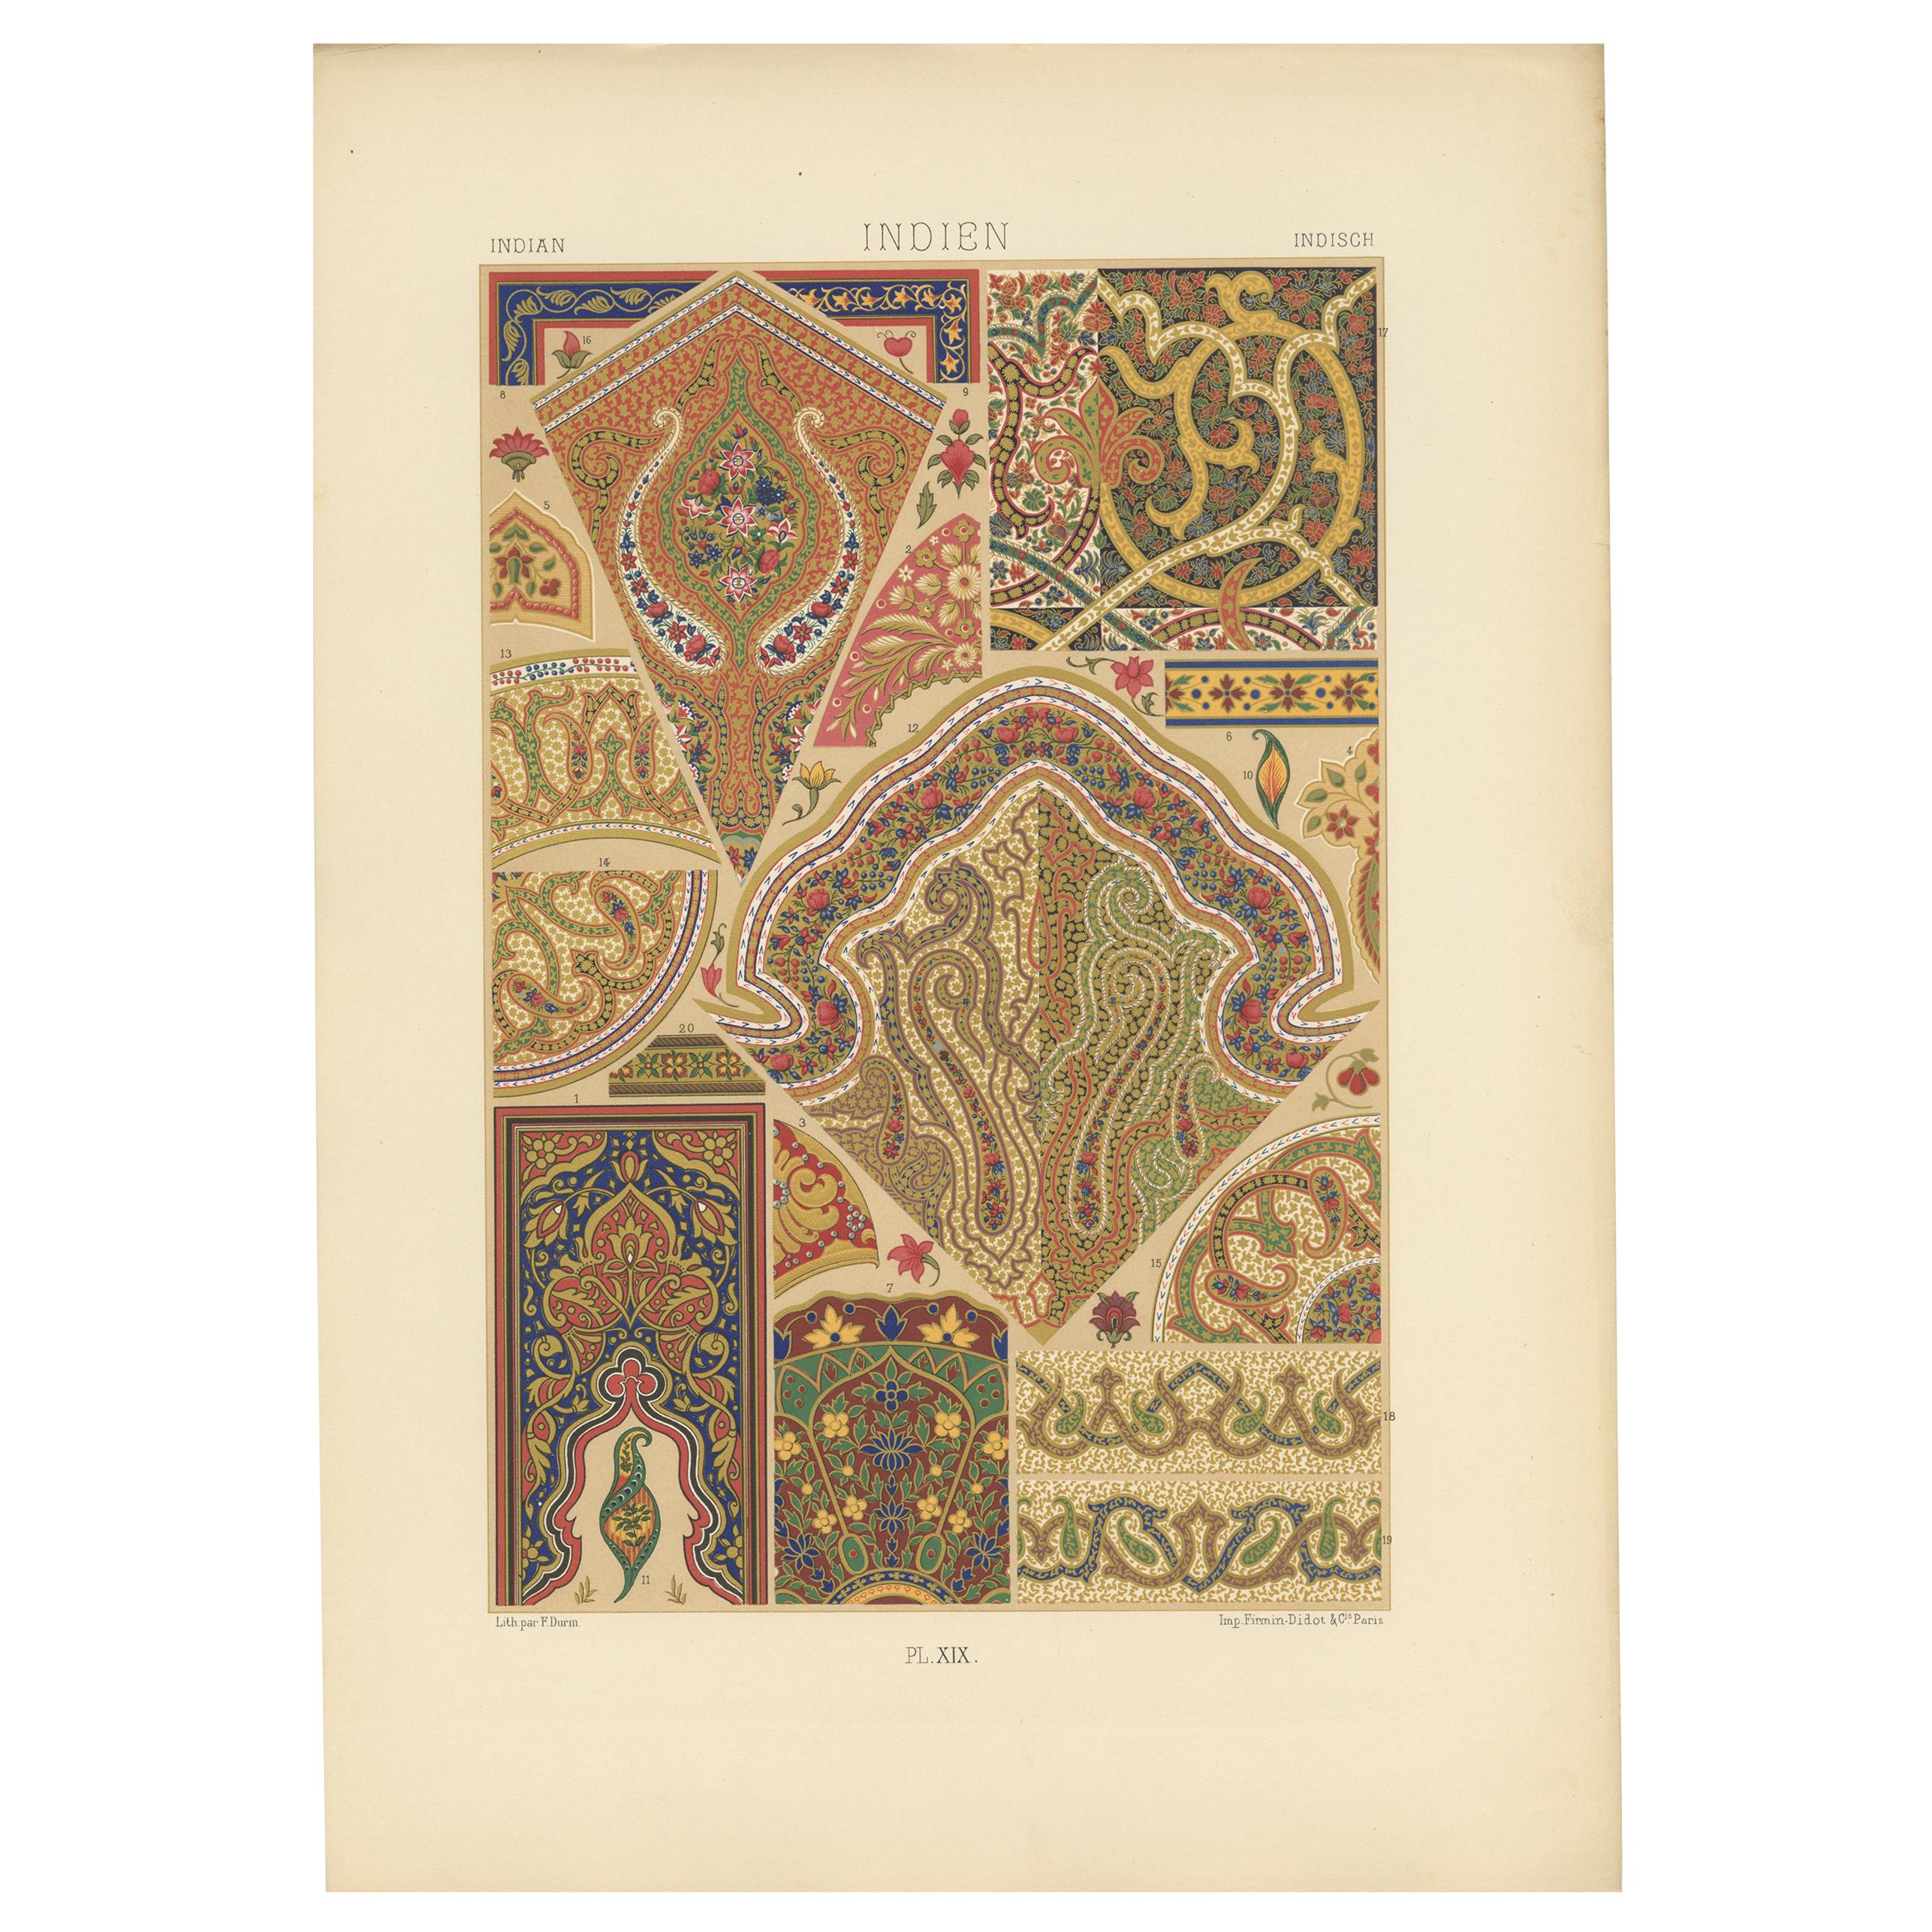 Pl. 19 Antique Print of Indian Ornaments by Racinet, circa 1890